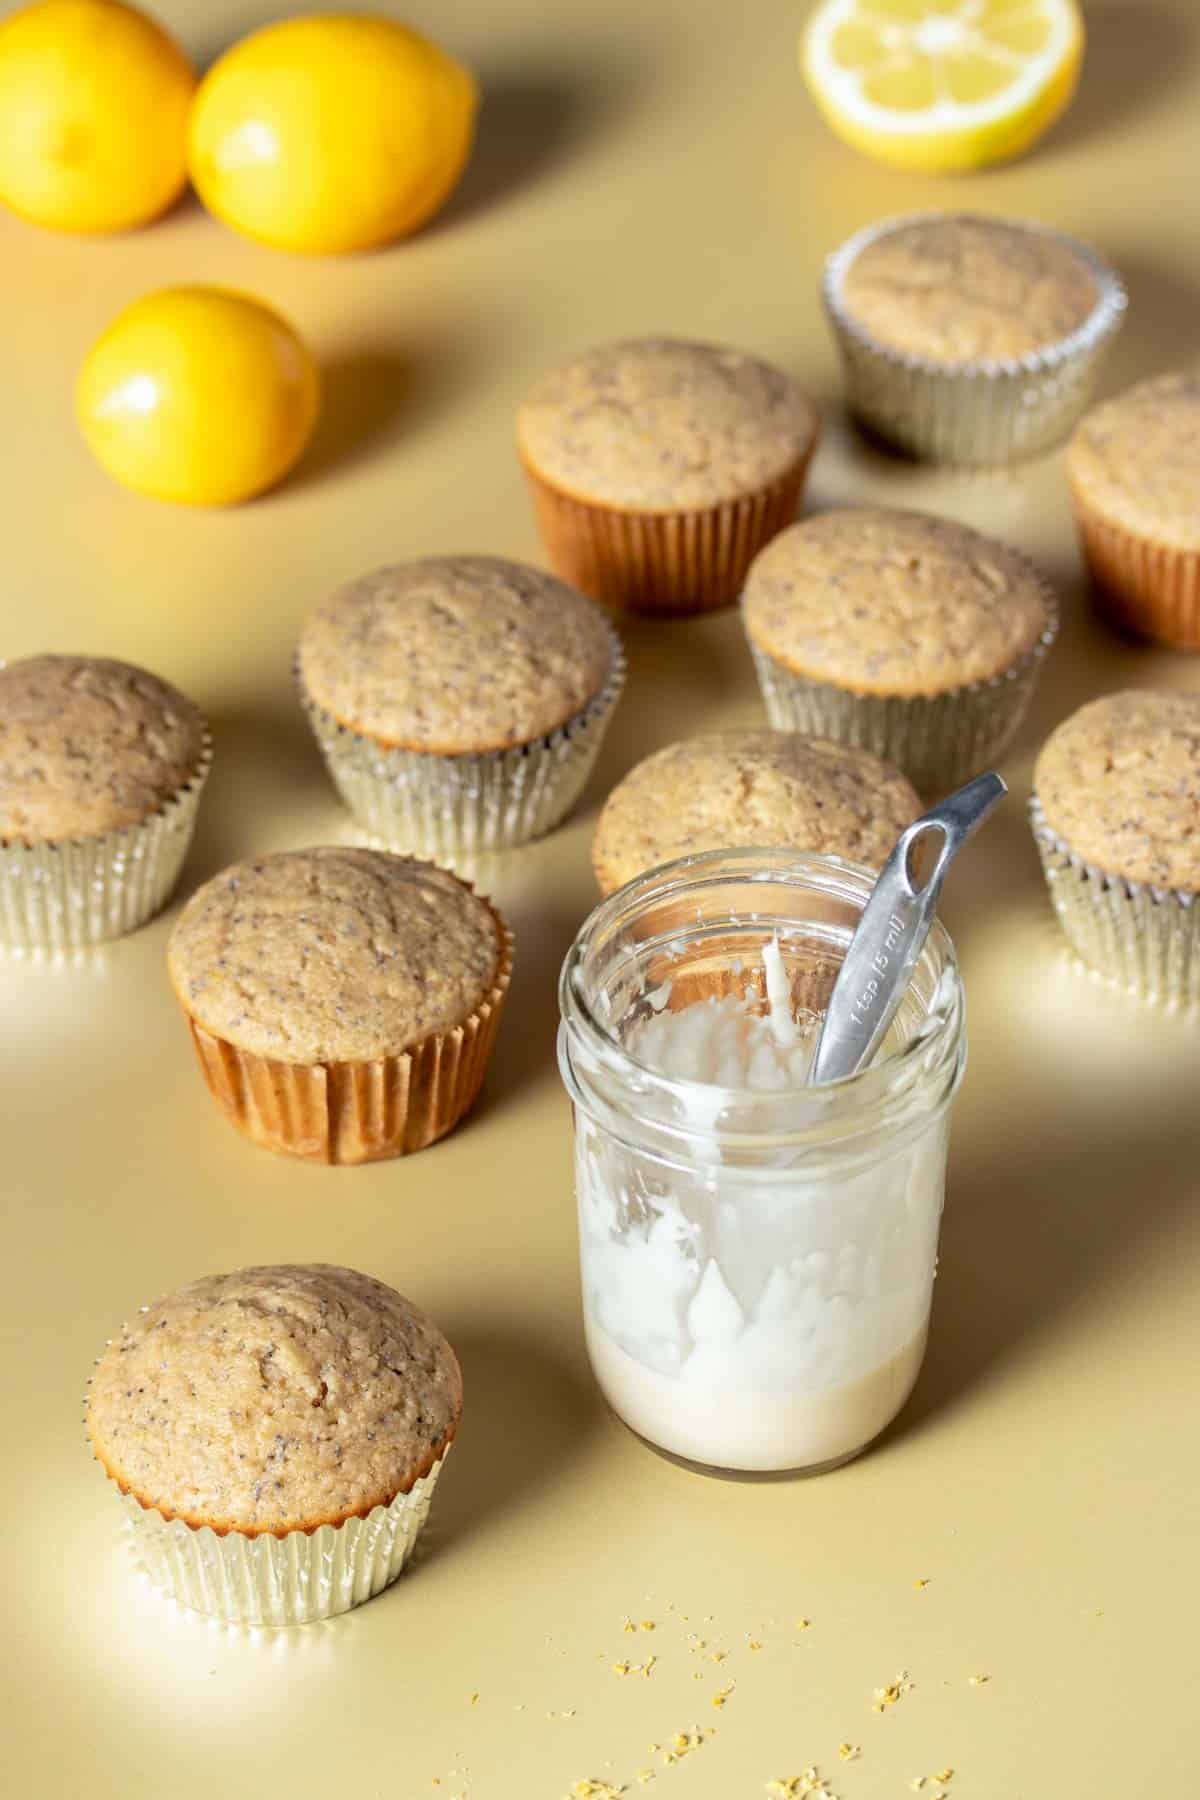 A group of lemon poppy seed muffins without glaze surrounding a glass jar with white glaze in it.